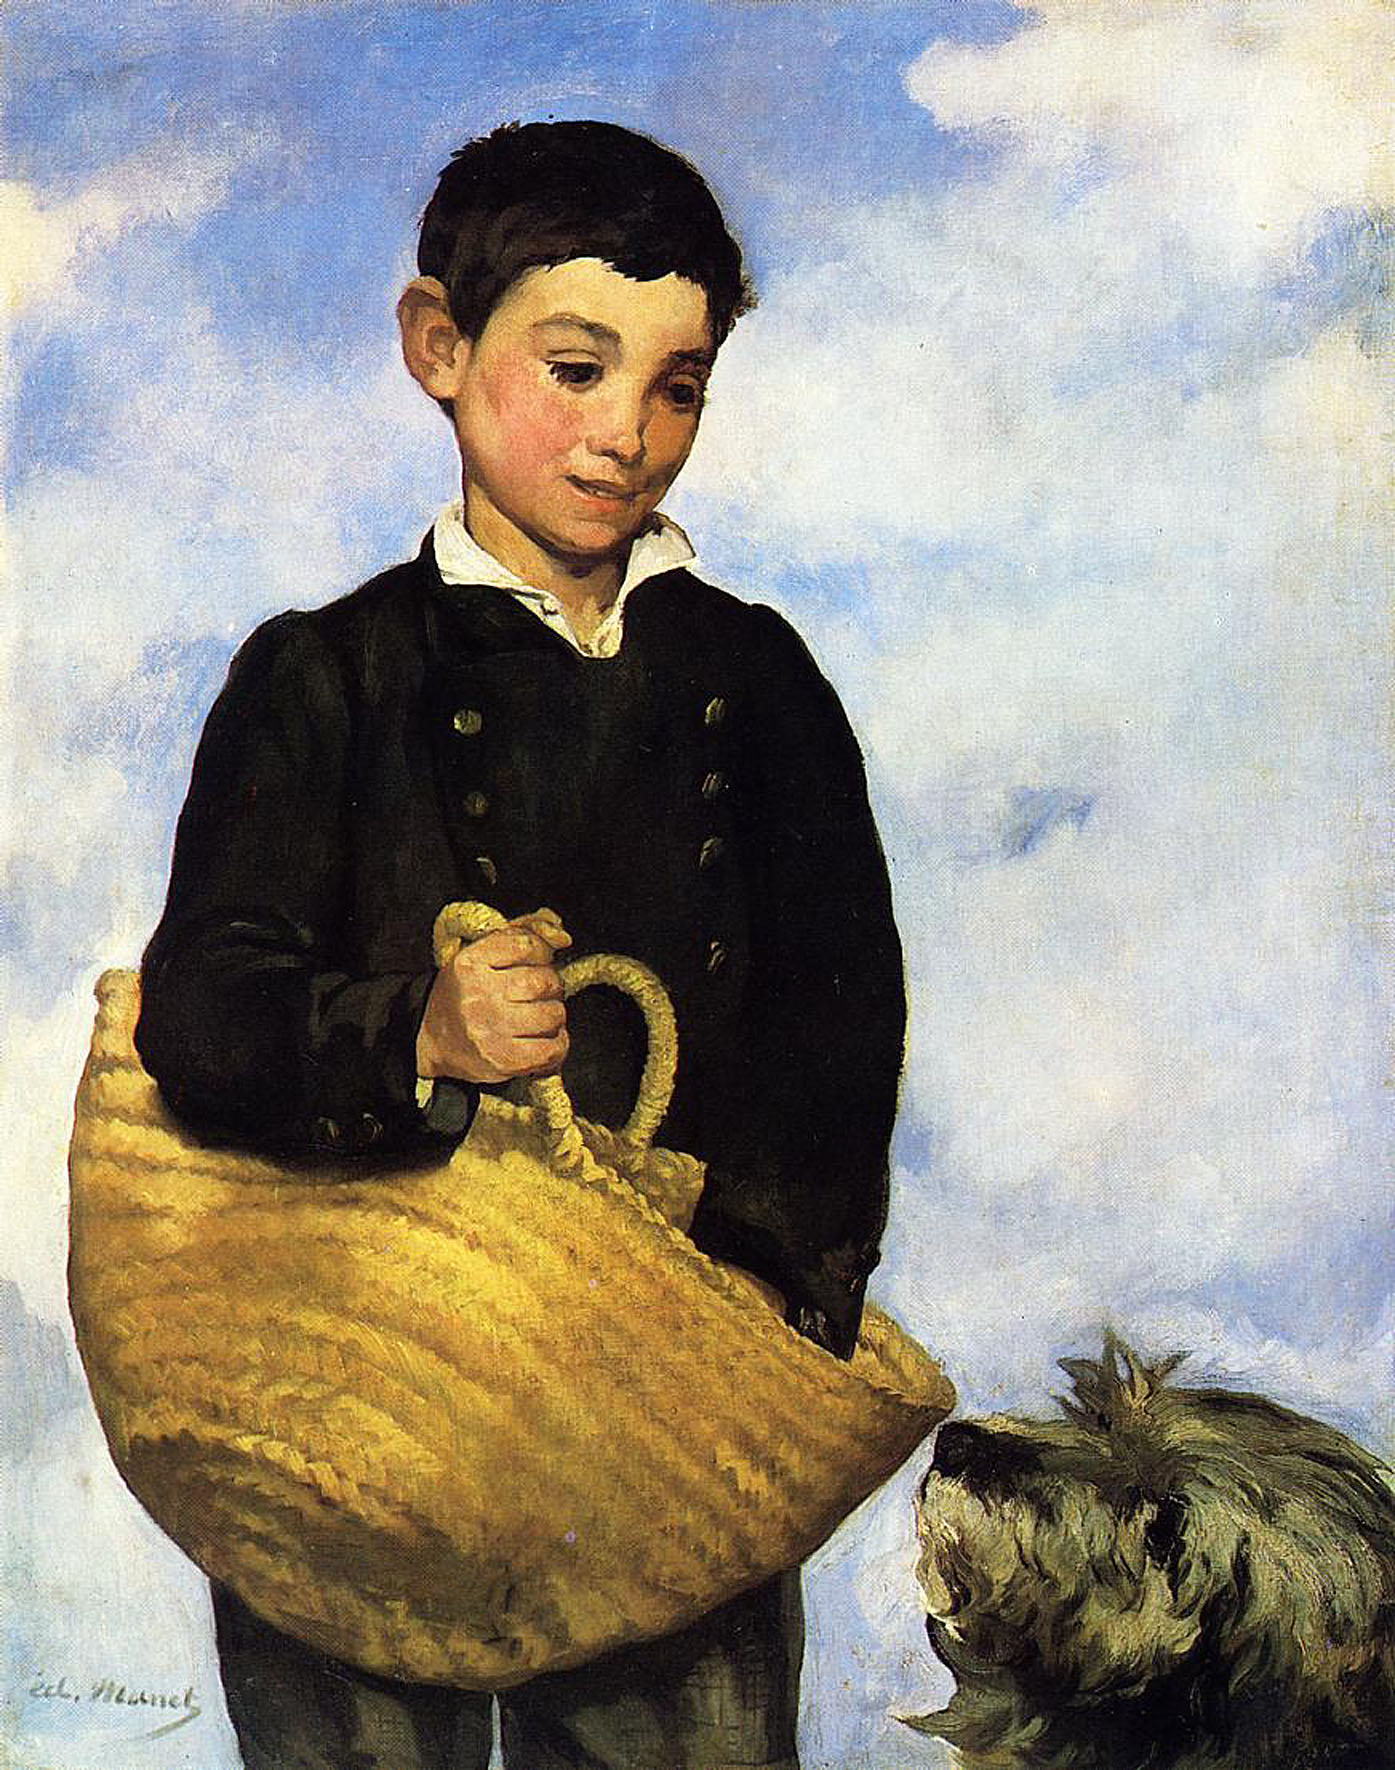 A boy with a dog - Edouard Manet - WikiArt.org